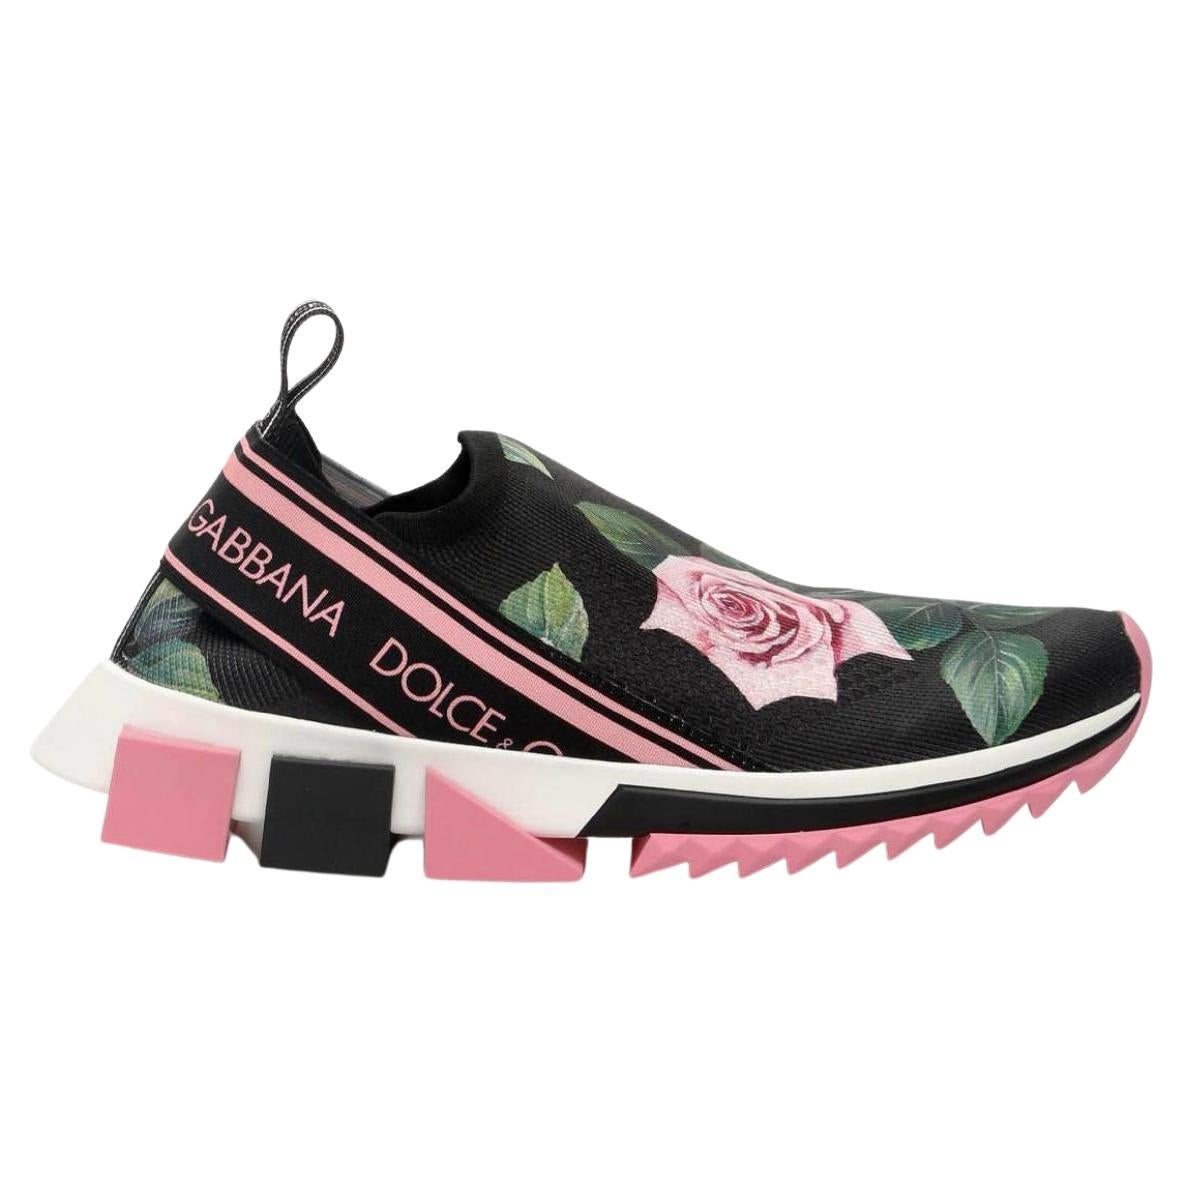 Dolce & Gabbana Black Pink Tropical Rose Stretch Knit Sock Sneakers Trainers For Sale